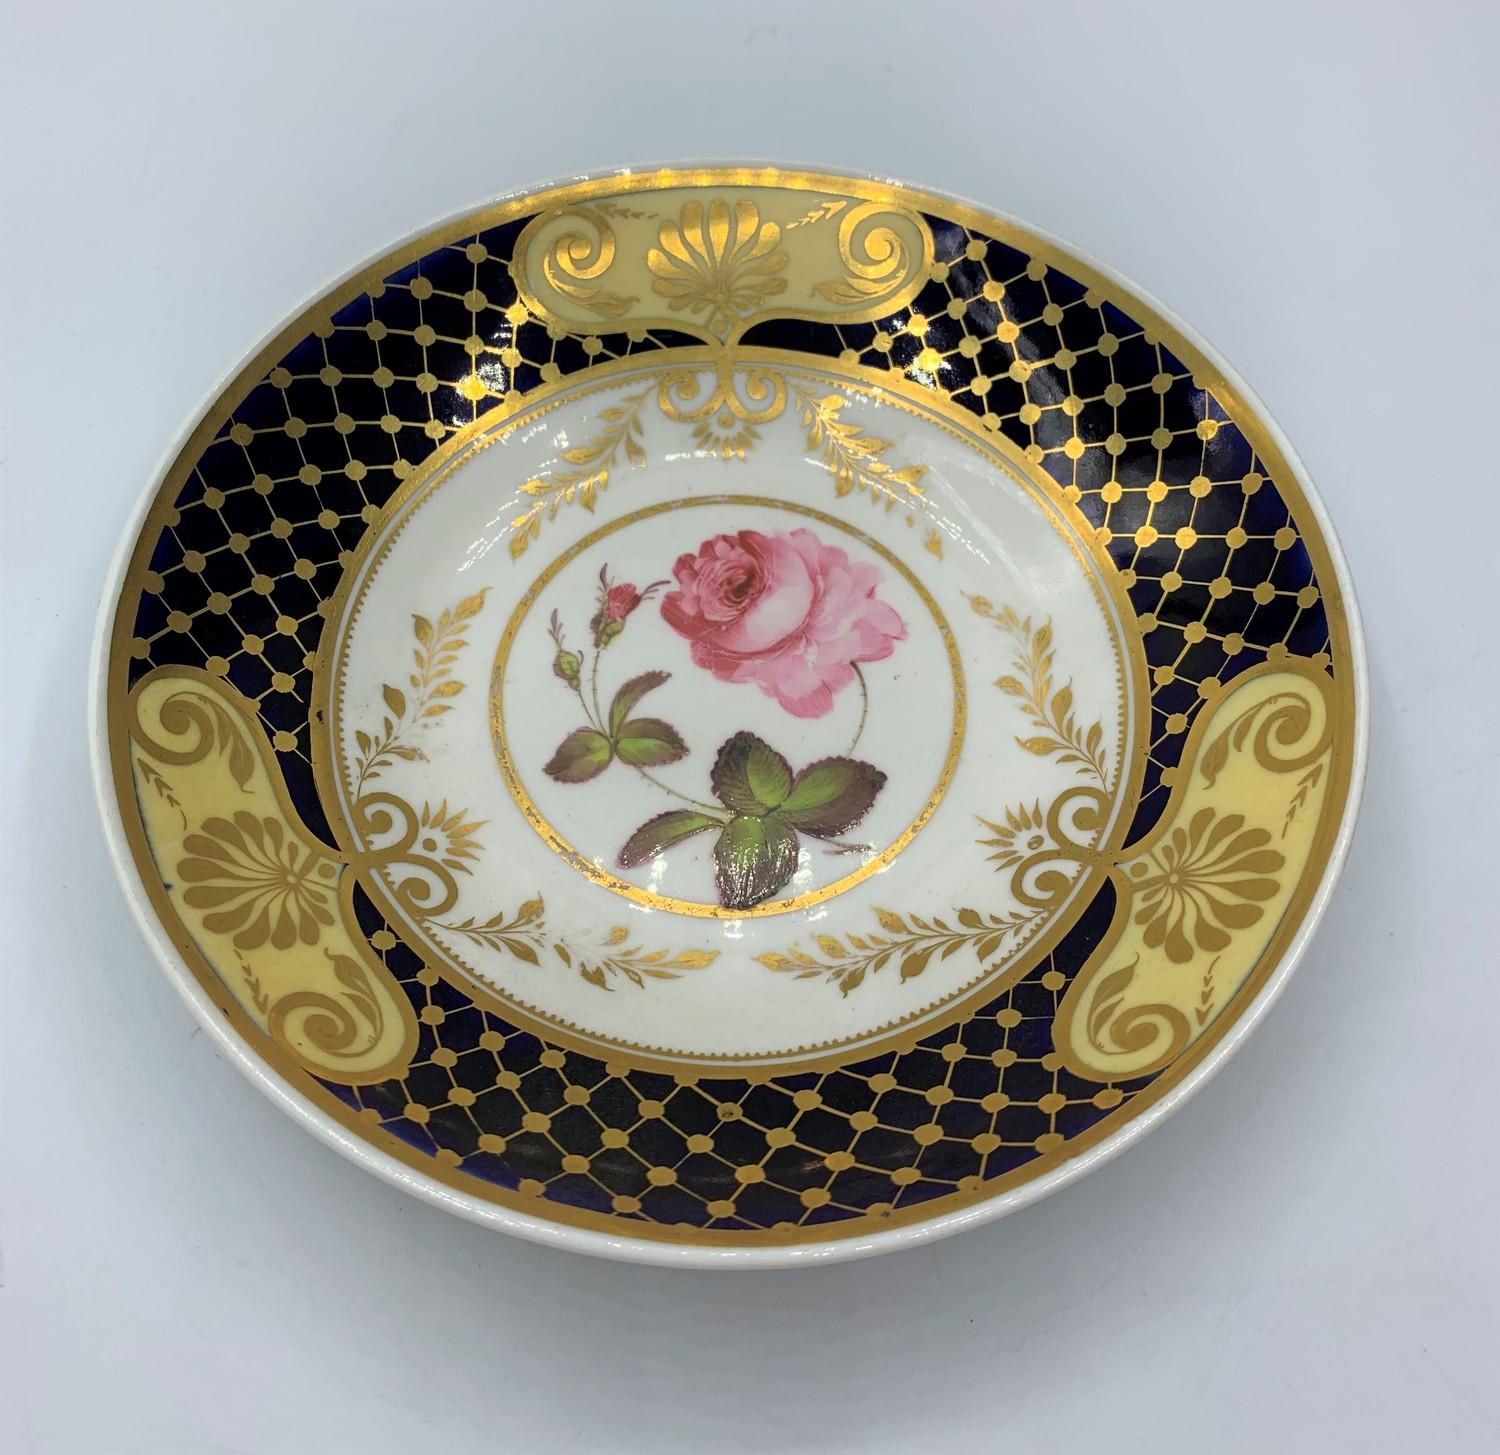 H&R Daniel Bell shape Cup & Saucer circa 1830 (2) - Image 6 of 8